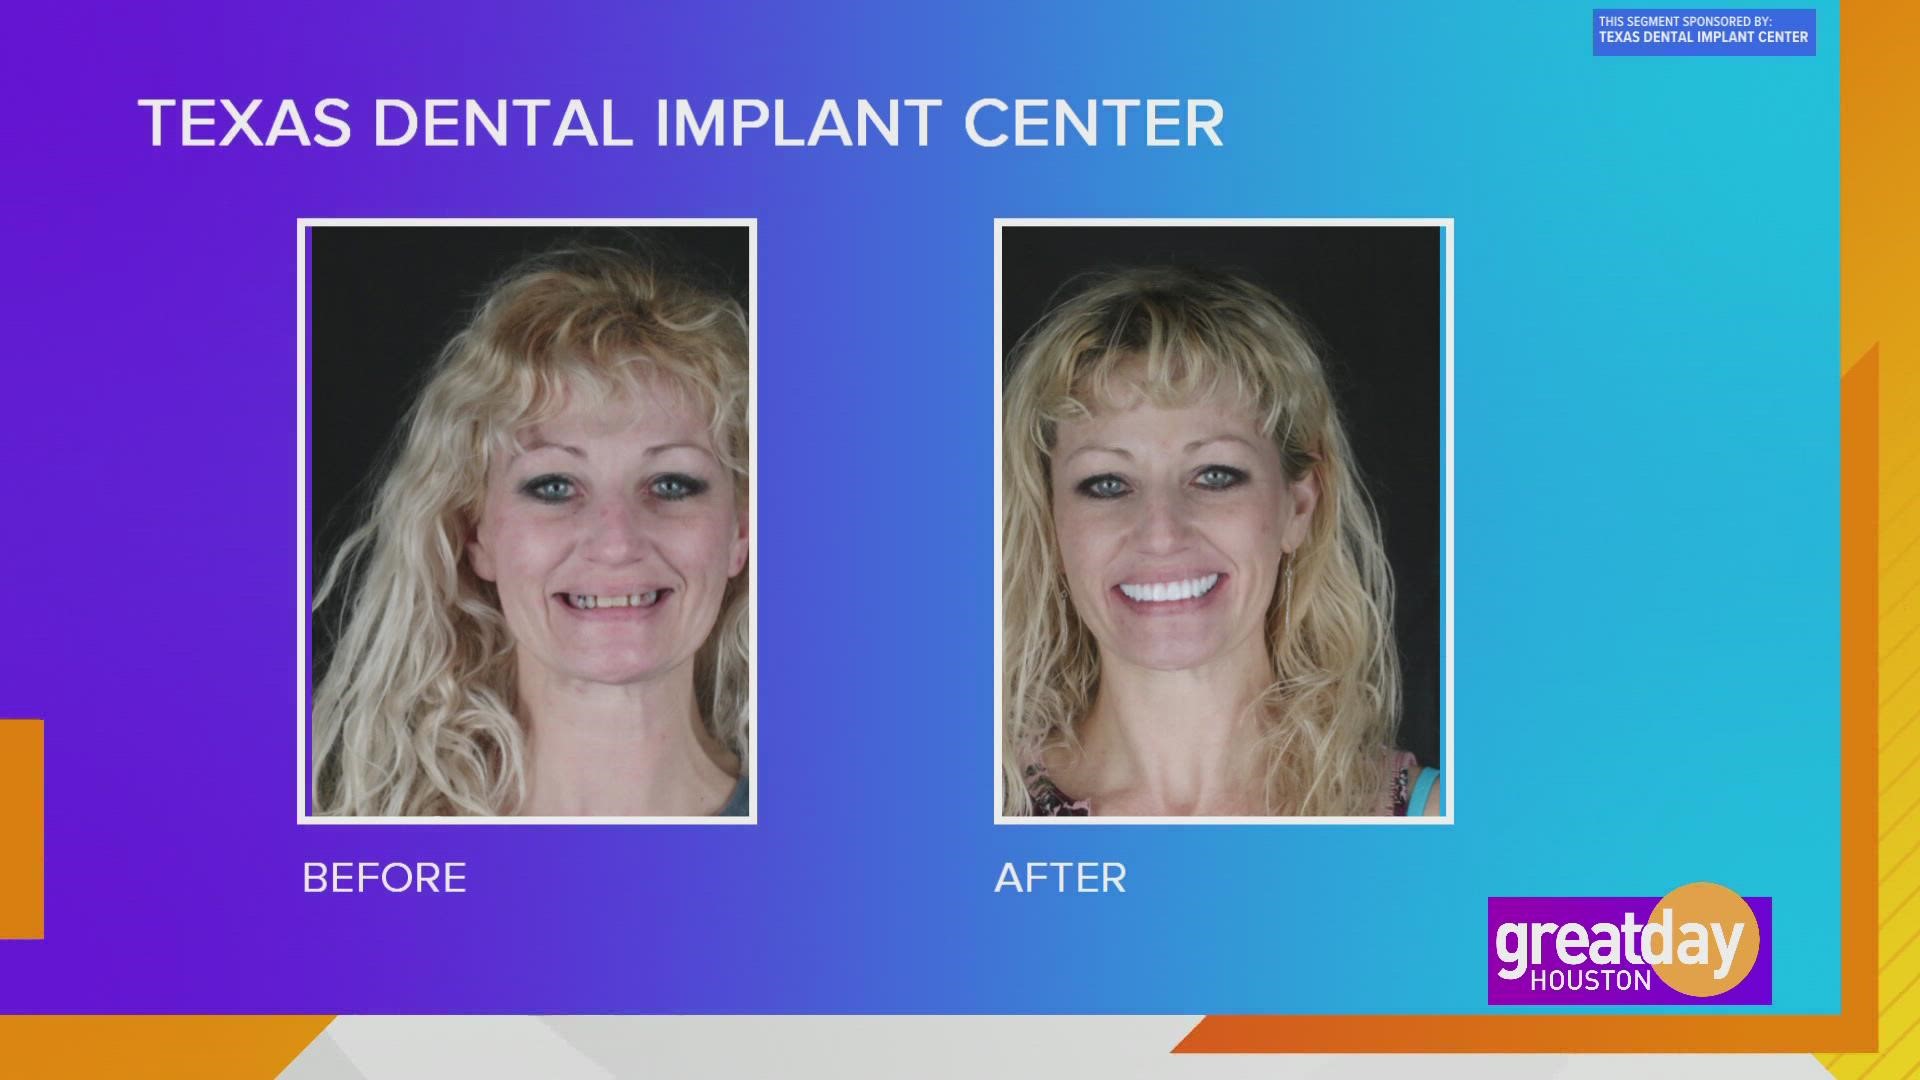 No more hiding behind your smile! Dr. Michel Azer with the Texas Dental Implant Center, shares how his office can transform your smile and your confidence!